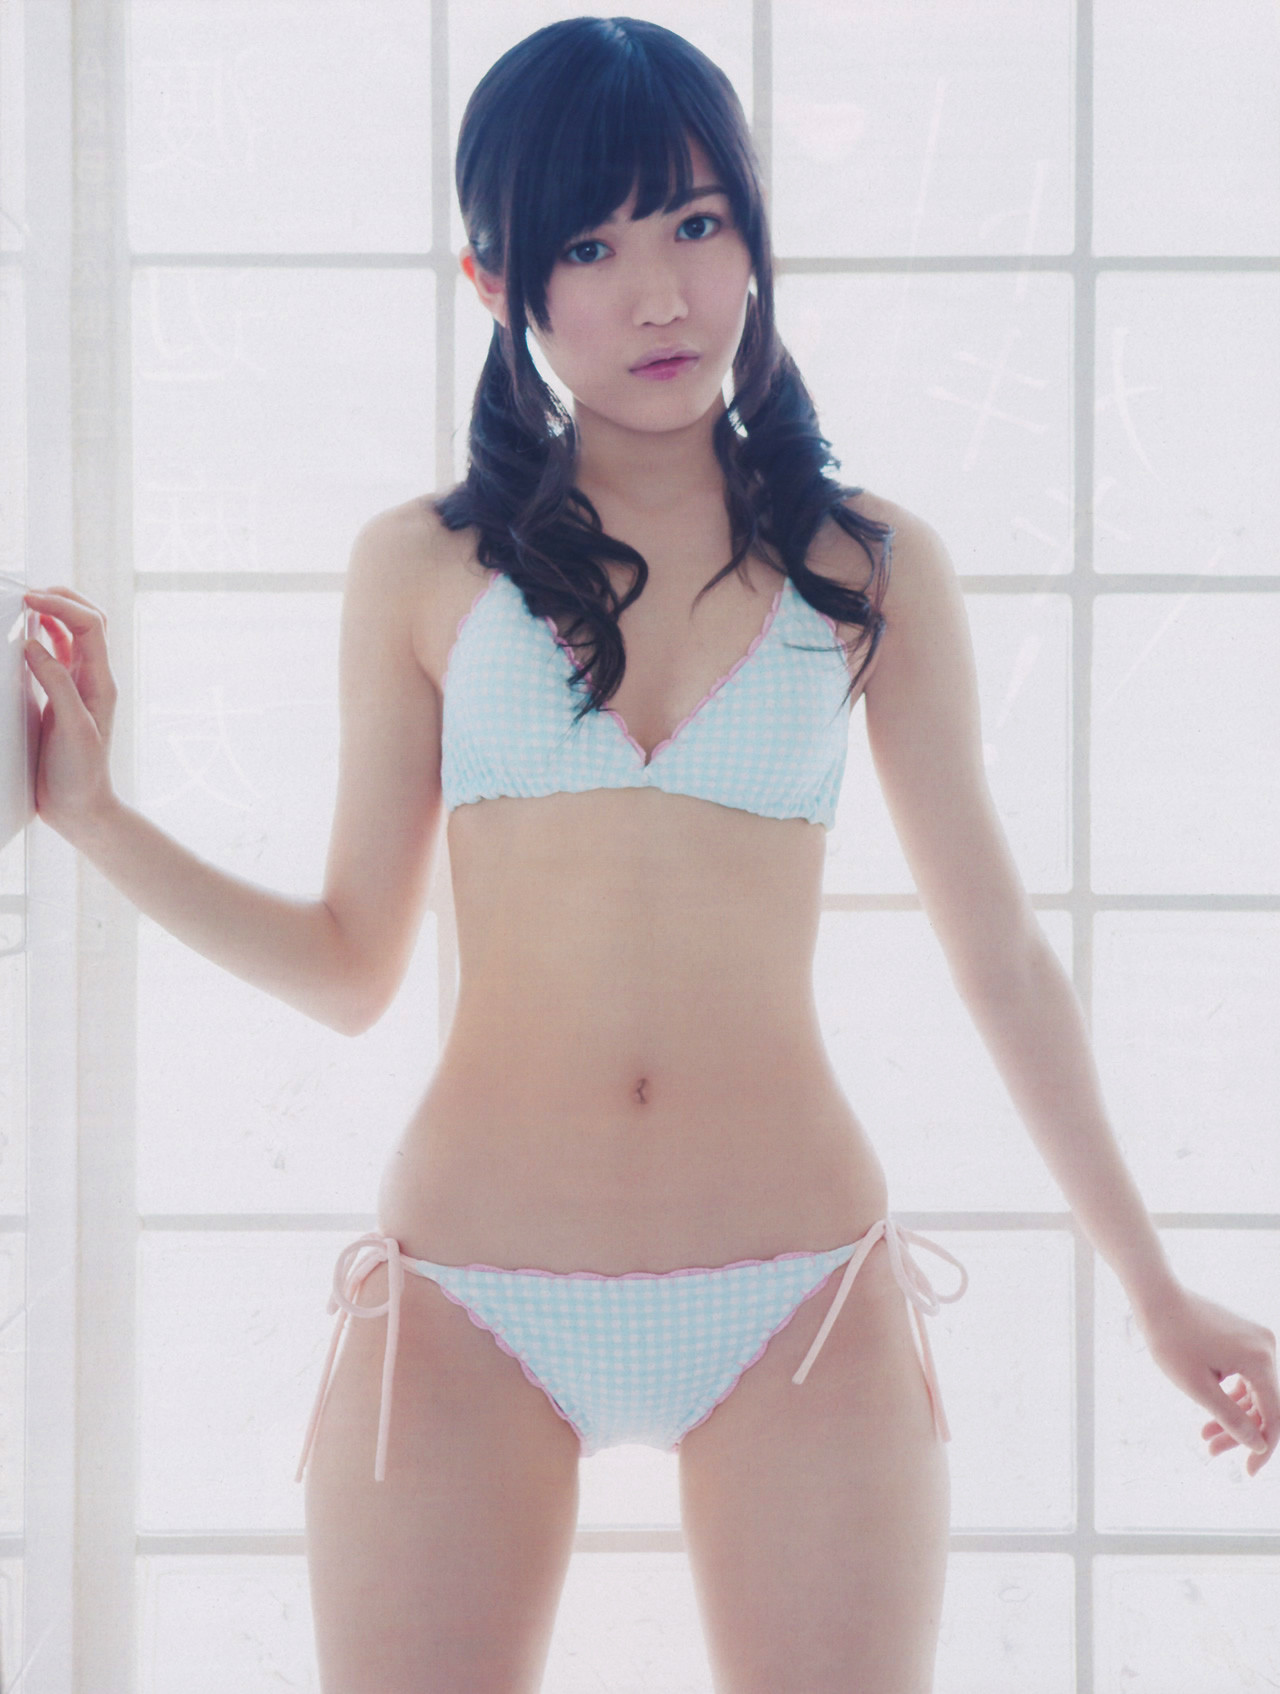 Mayu Watanabe's body shape from waist to thighs is too sexy